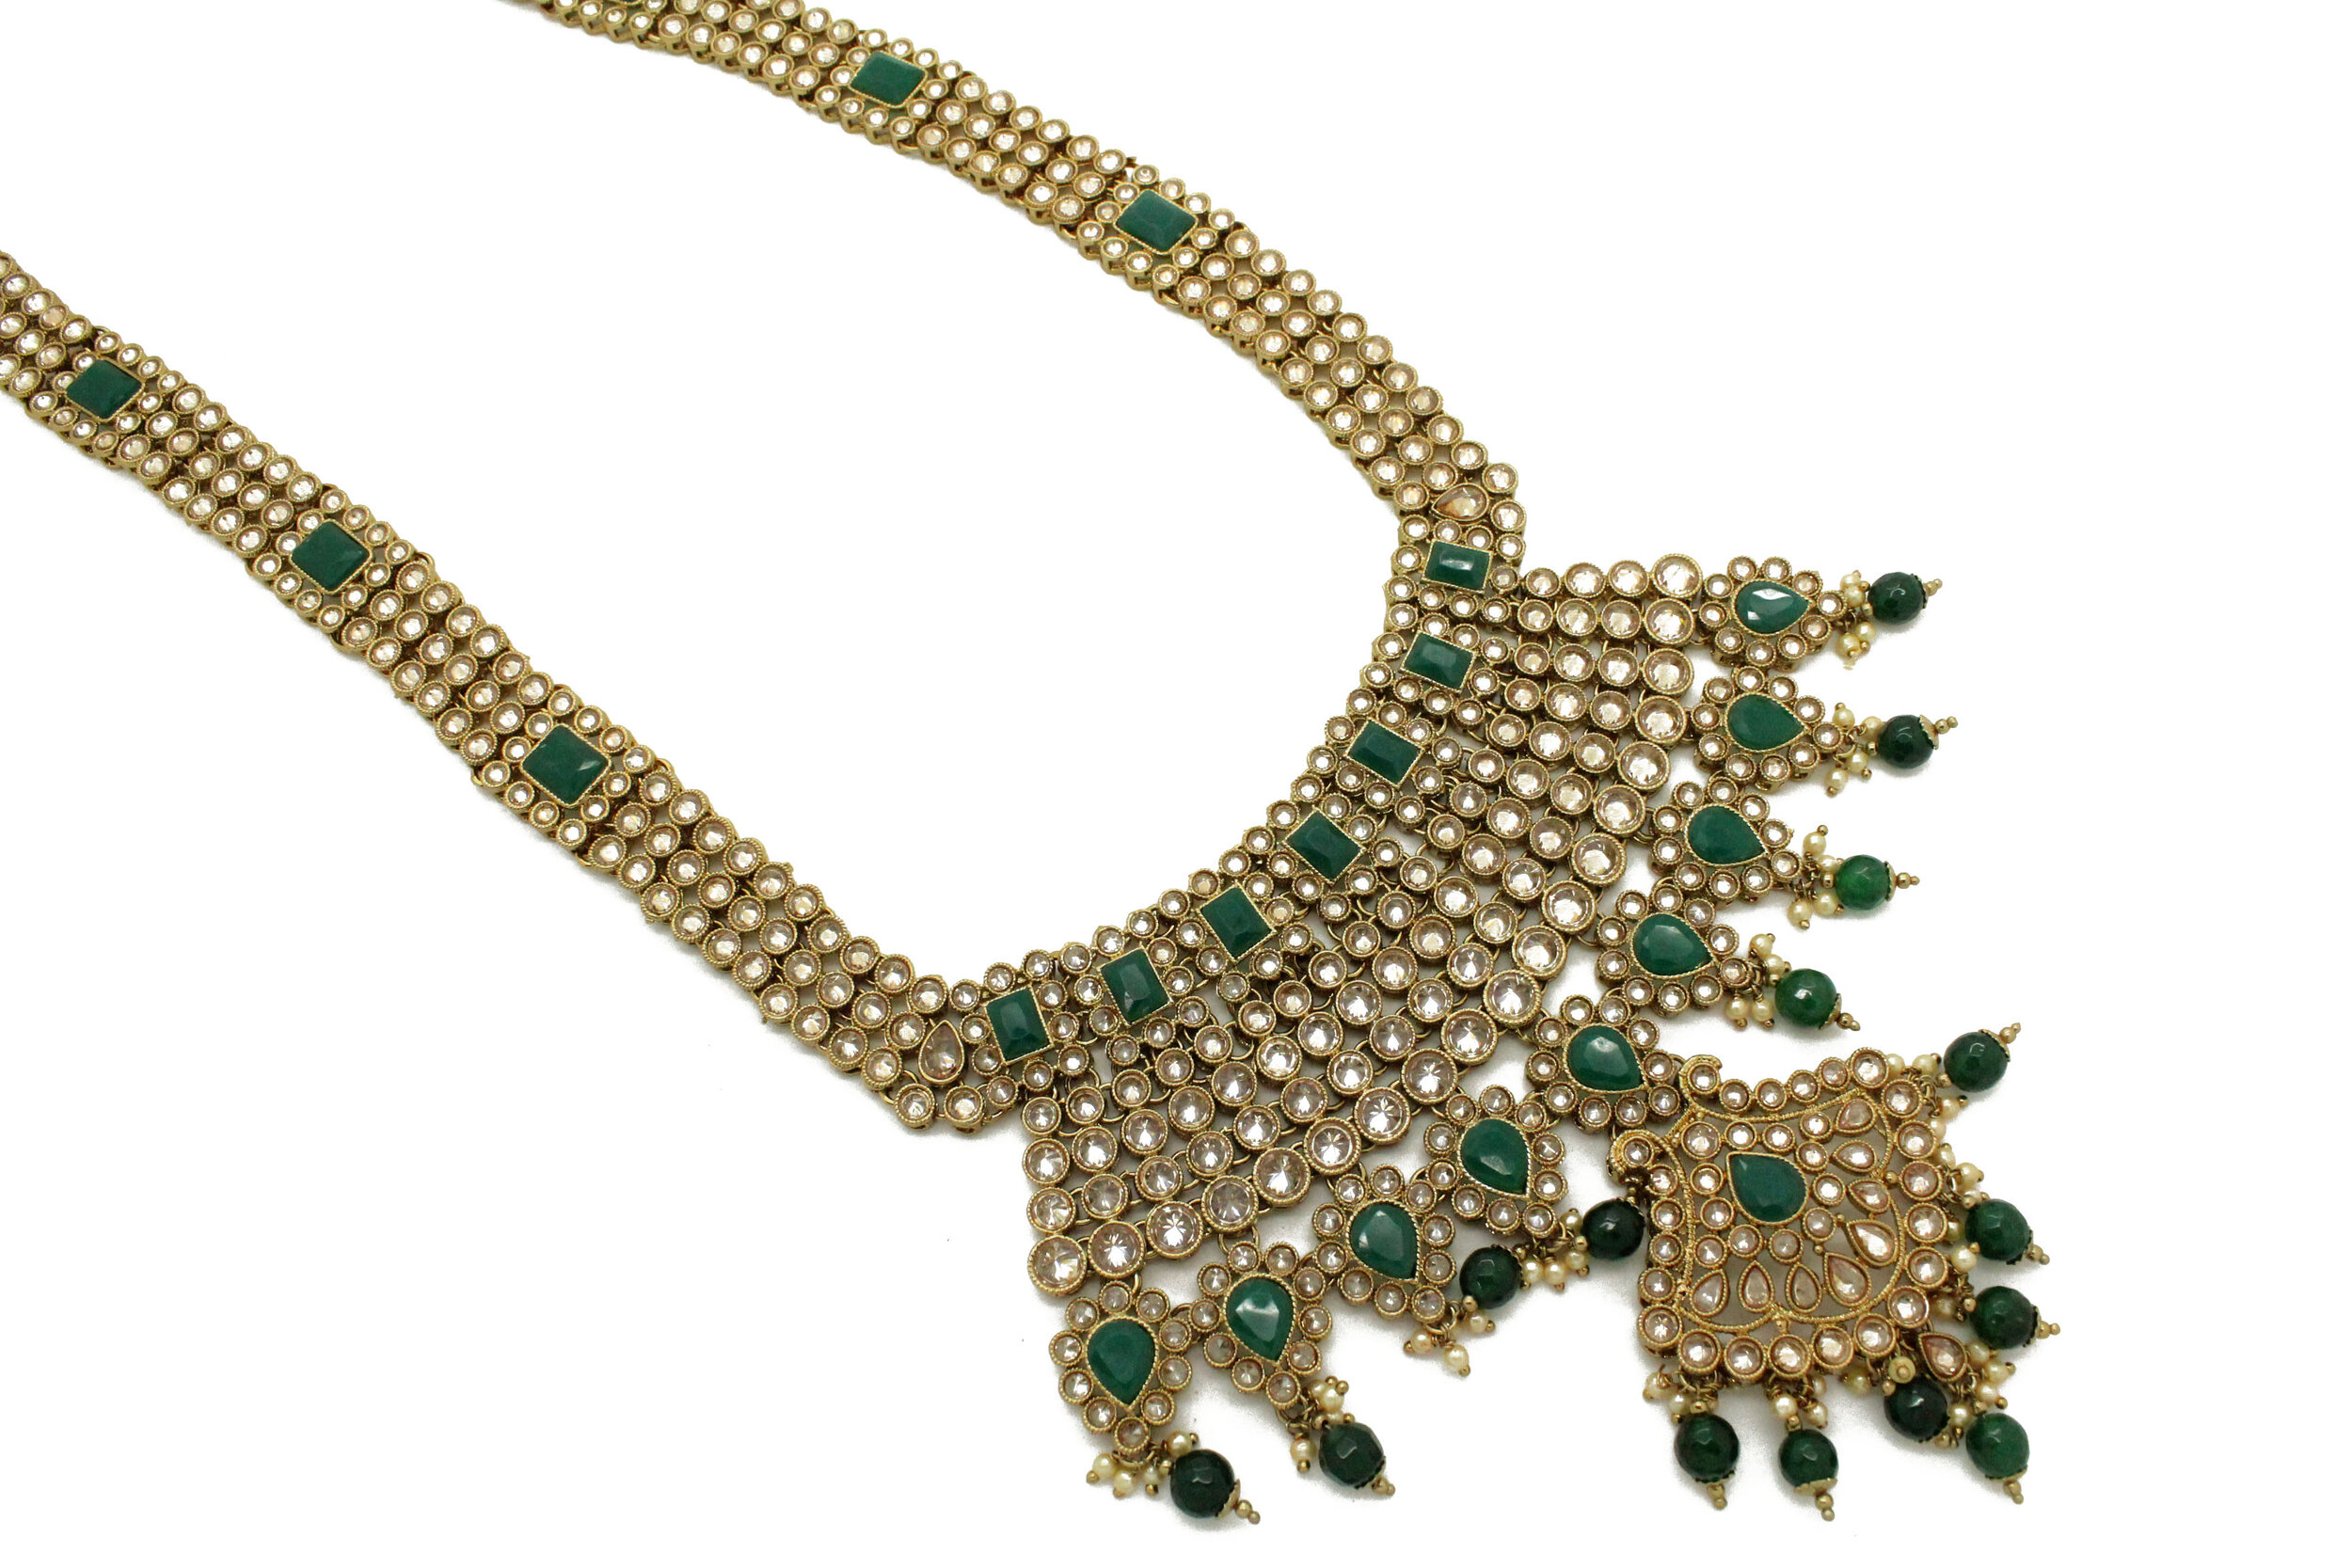 Indian Asian Bollywood Bridal Antique Gold Green Mala Necklace